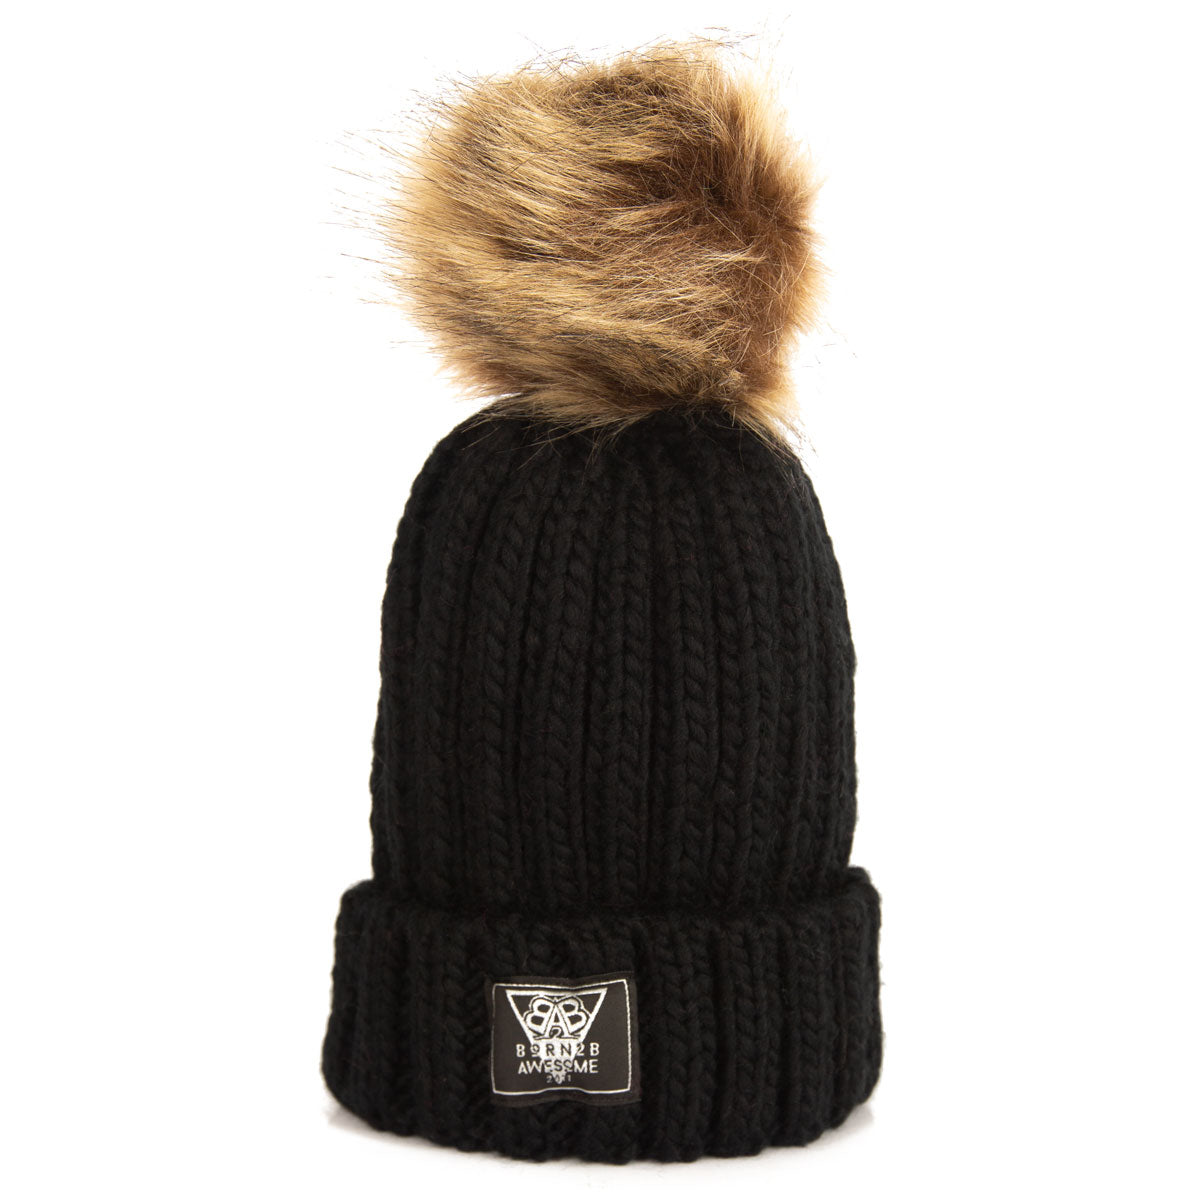 KIDS Knitted Bobble Beanie "Awesome Man" - B2BA Clothing